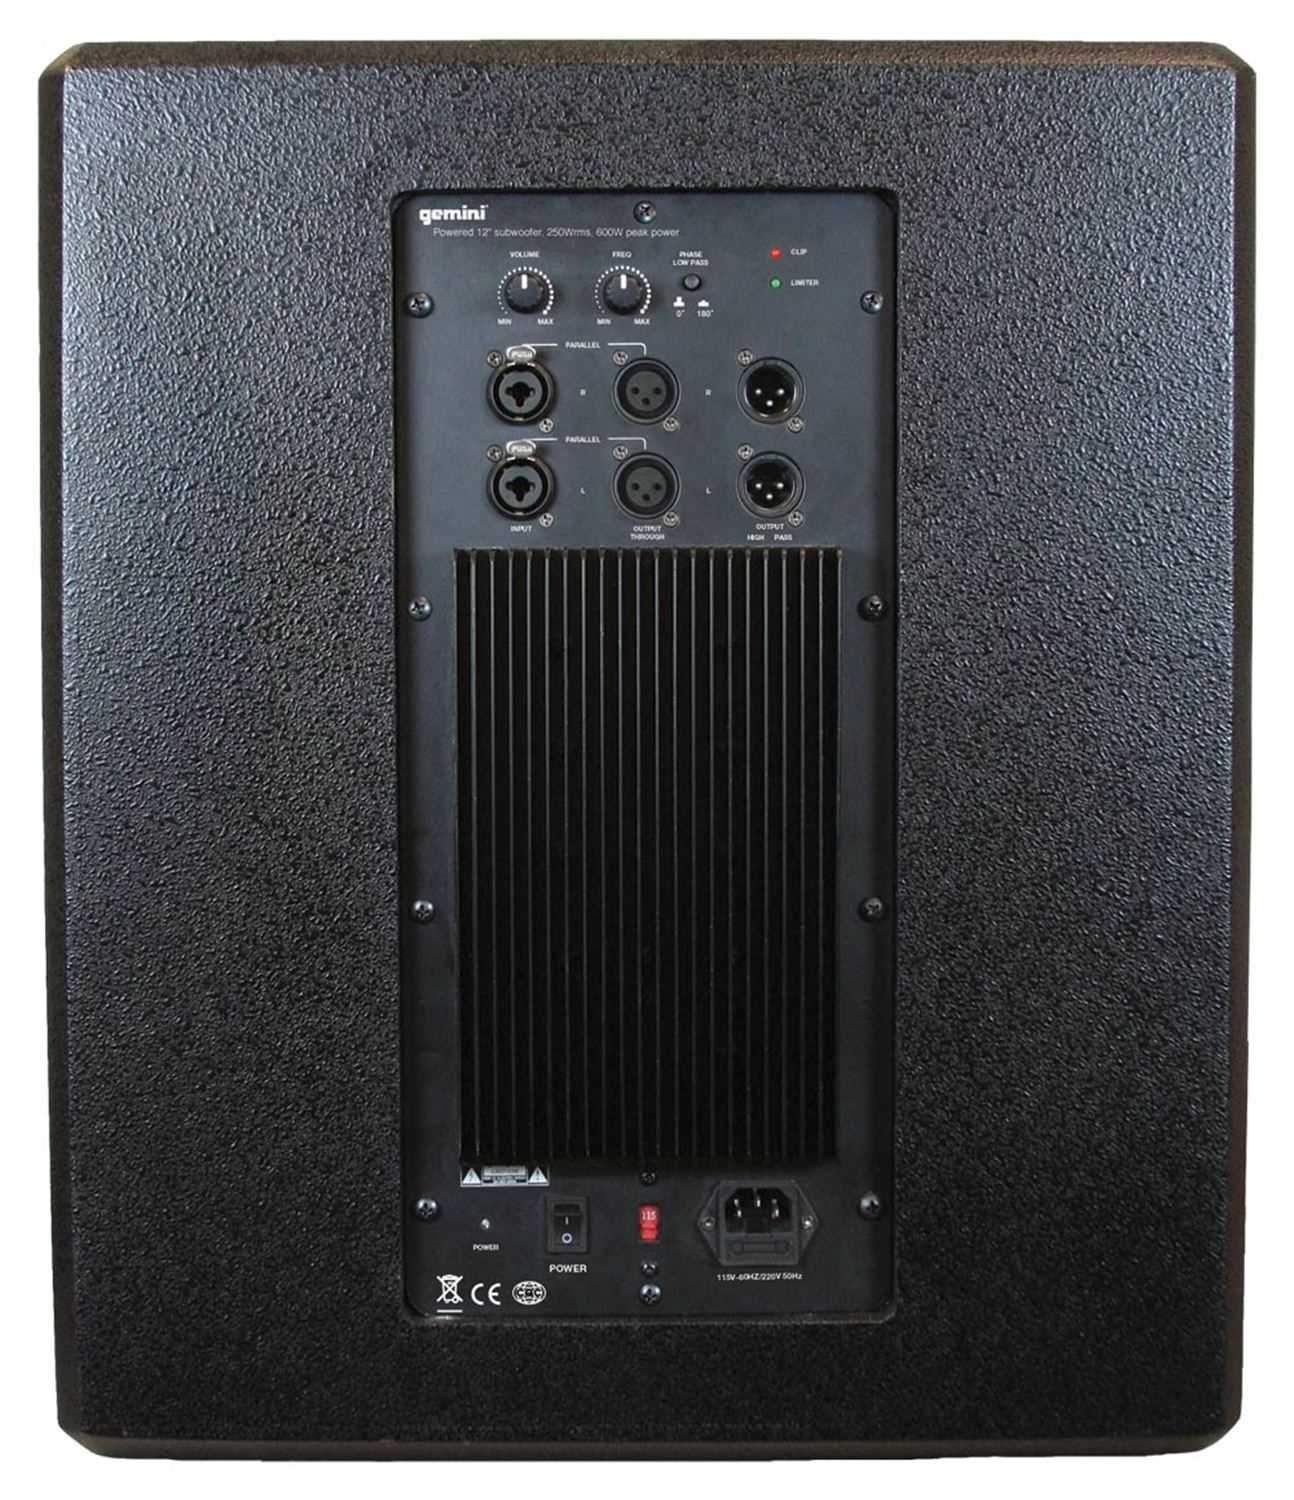 Gemini GVX-SUB12P Powered 12" Subwoofer - PSSL ProSound and Stage Lighting